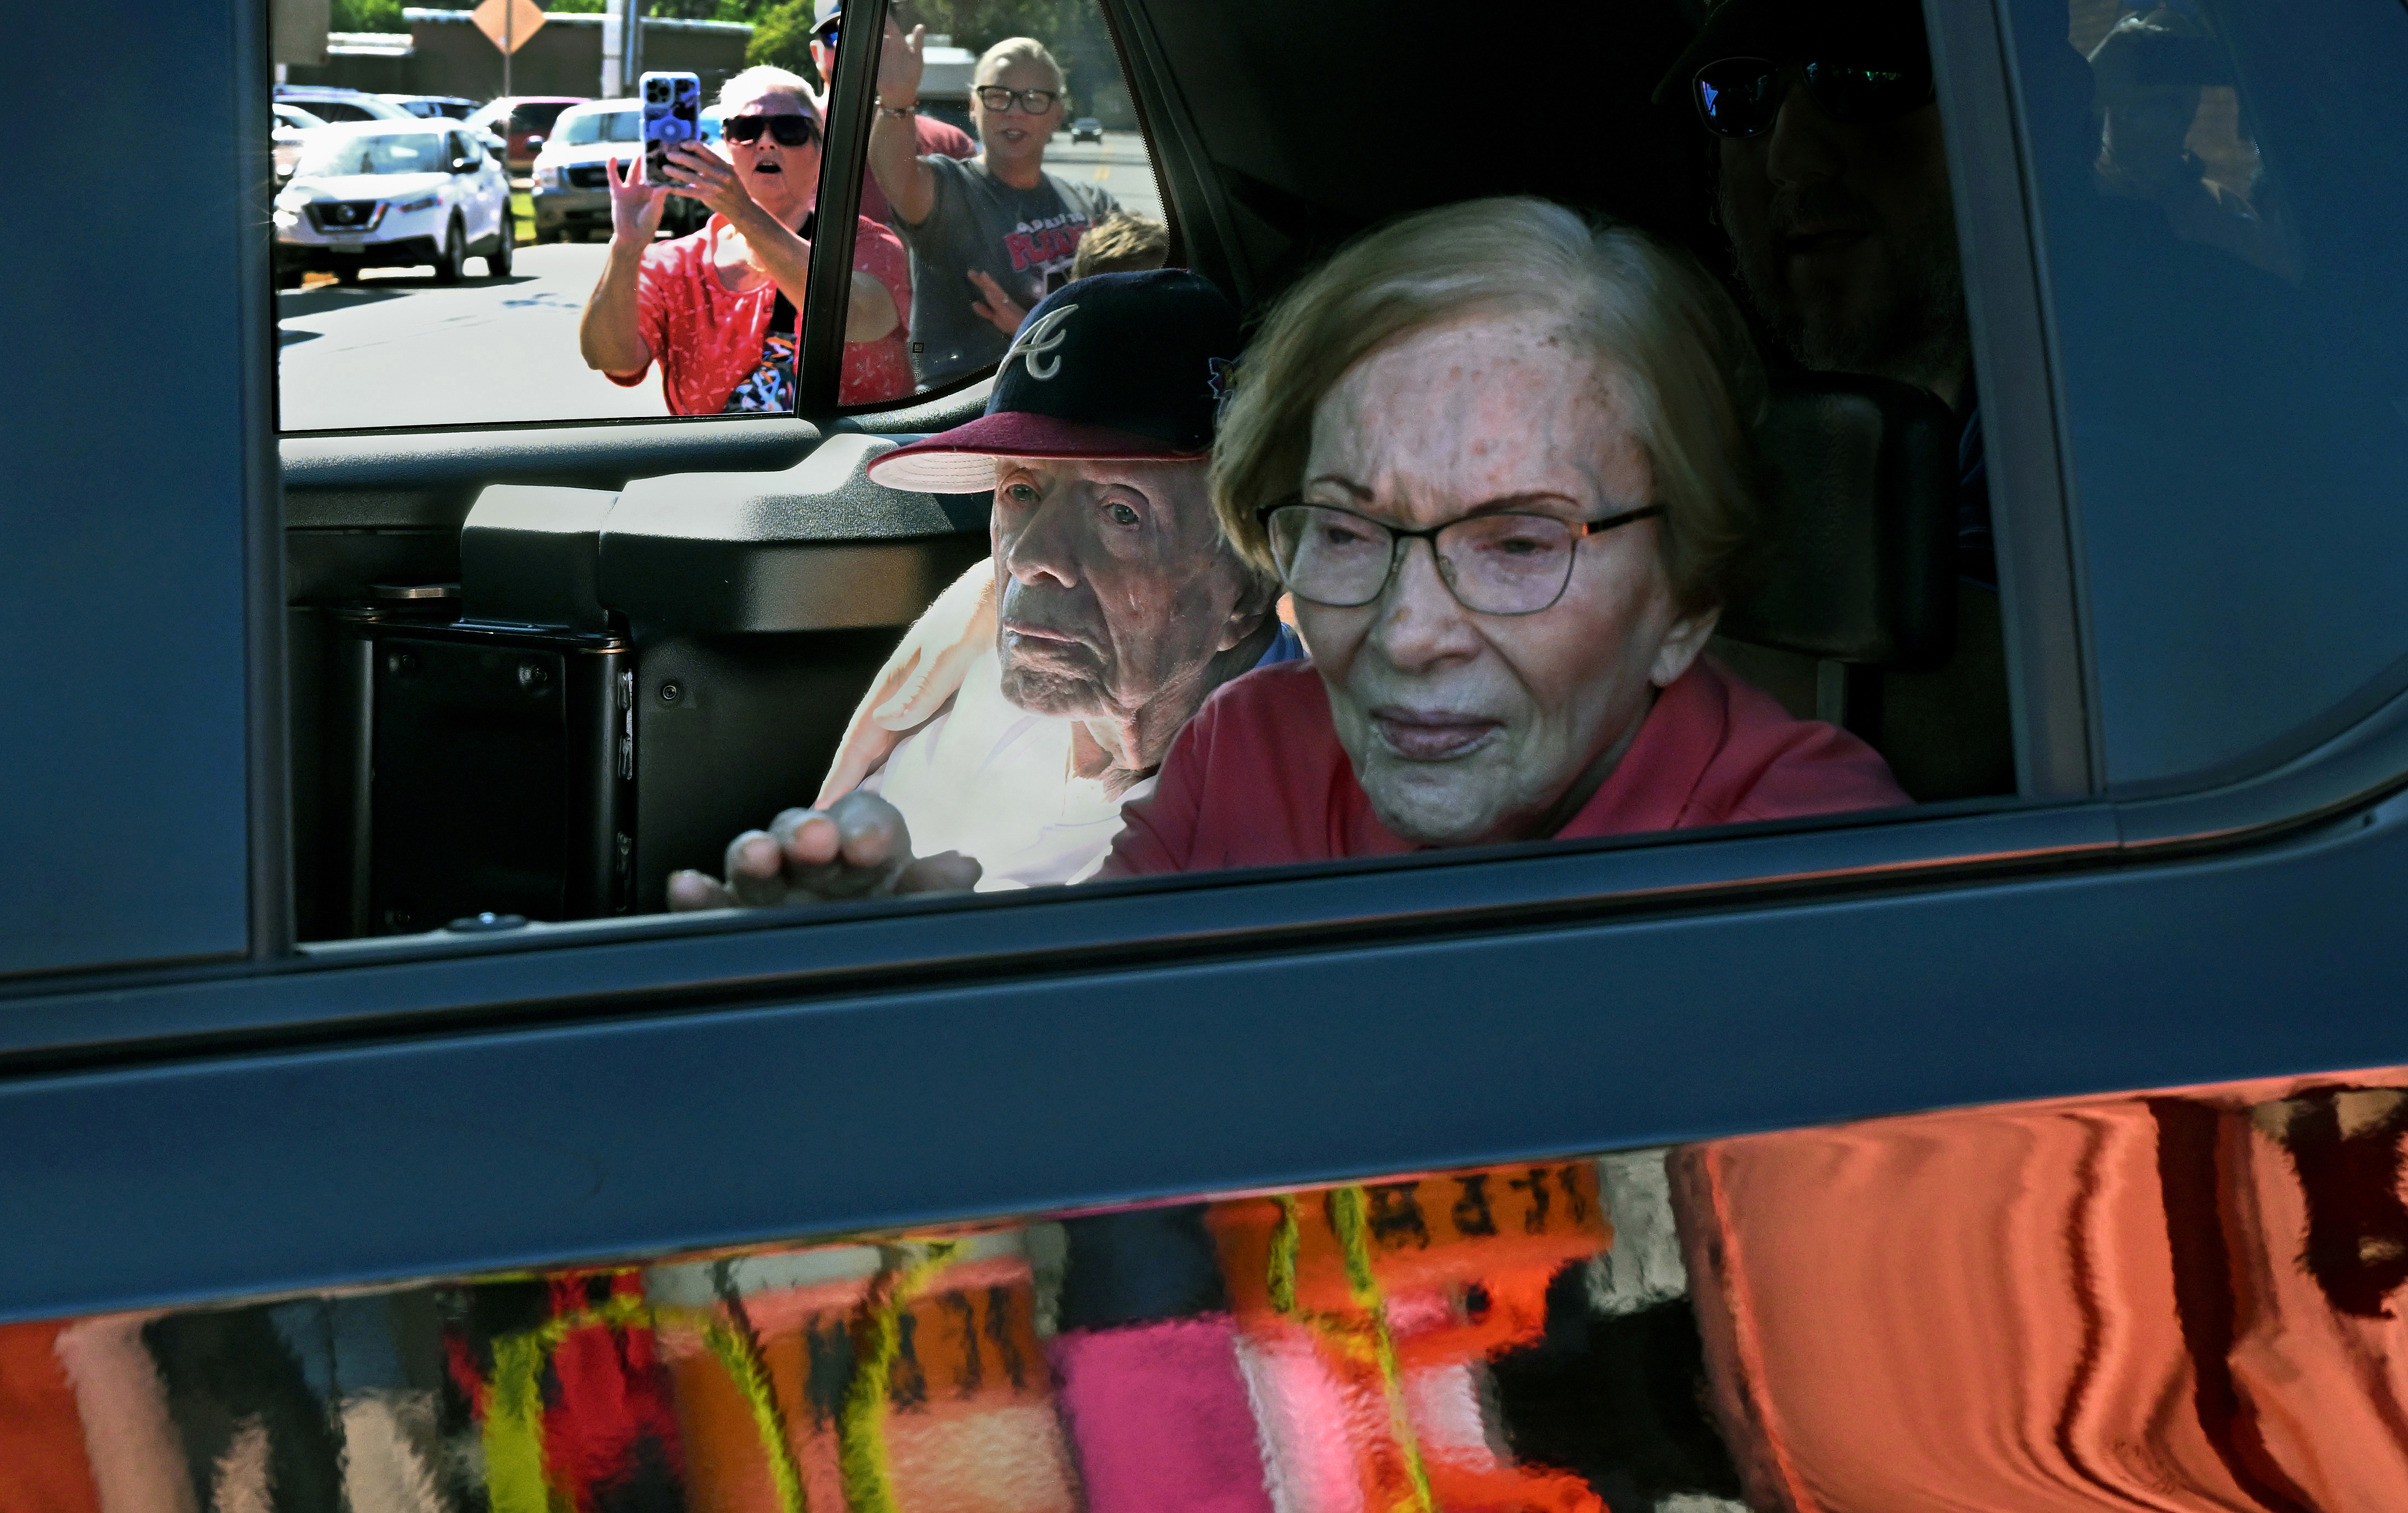 Former U.S. President Jimmy Carter and former U.S. First Lady Rosalynn Carter at the Peanut Festival Parade in Plains, Georgia on September 23, 2023 | Source: Getty Images